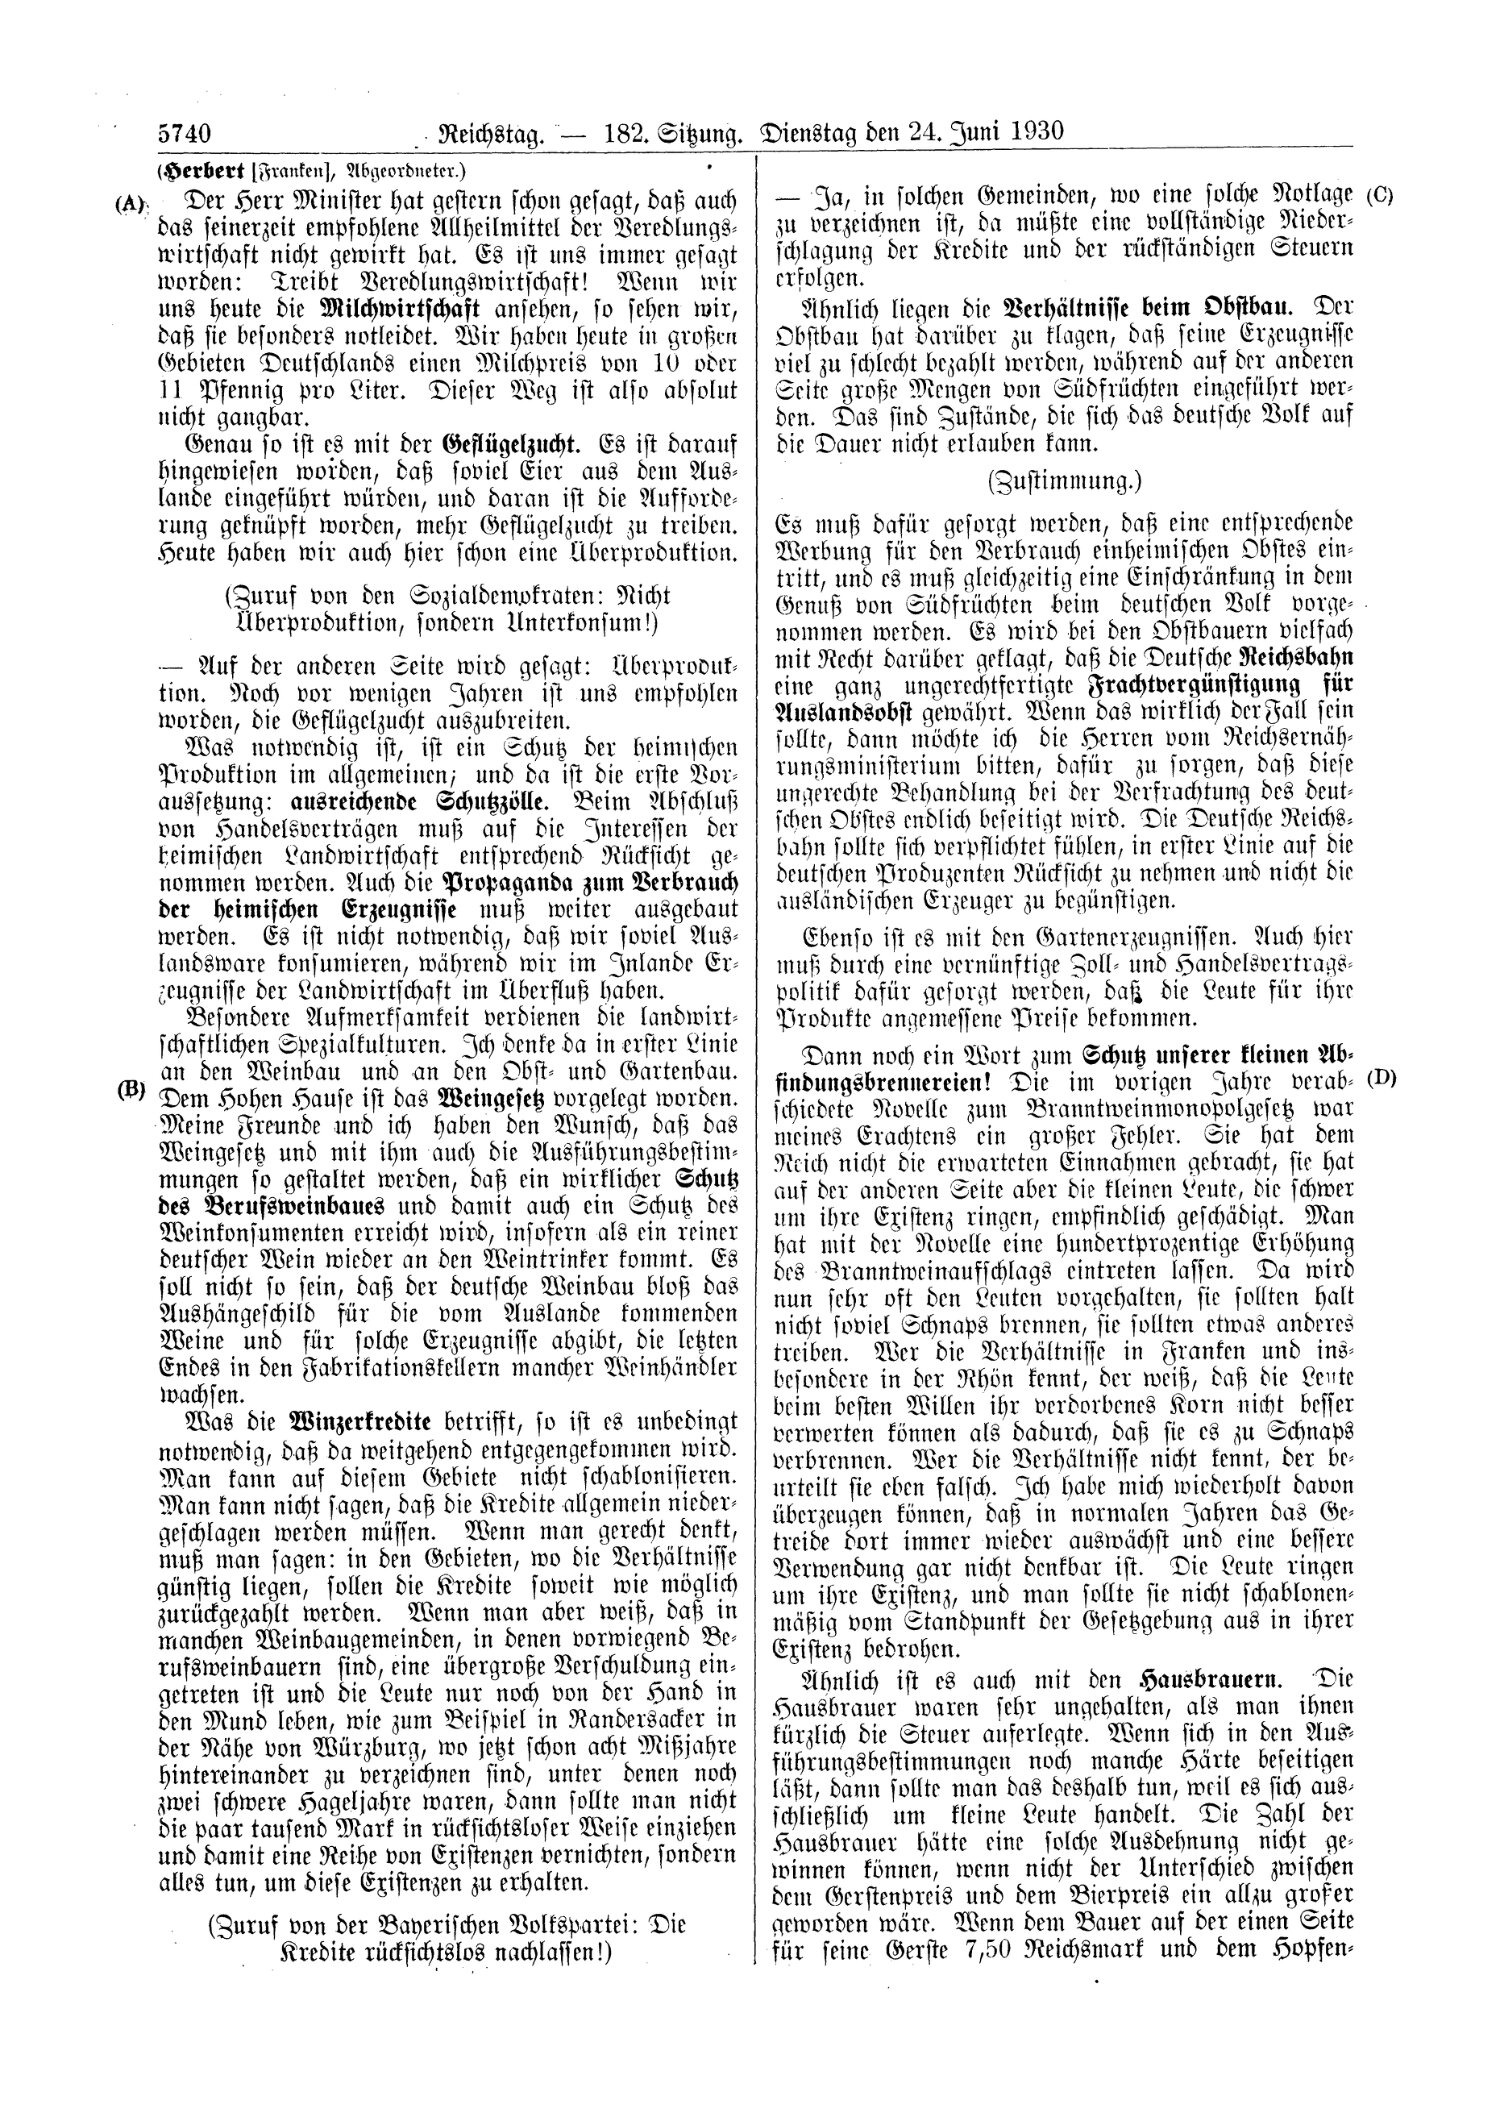 Scan of page 5740